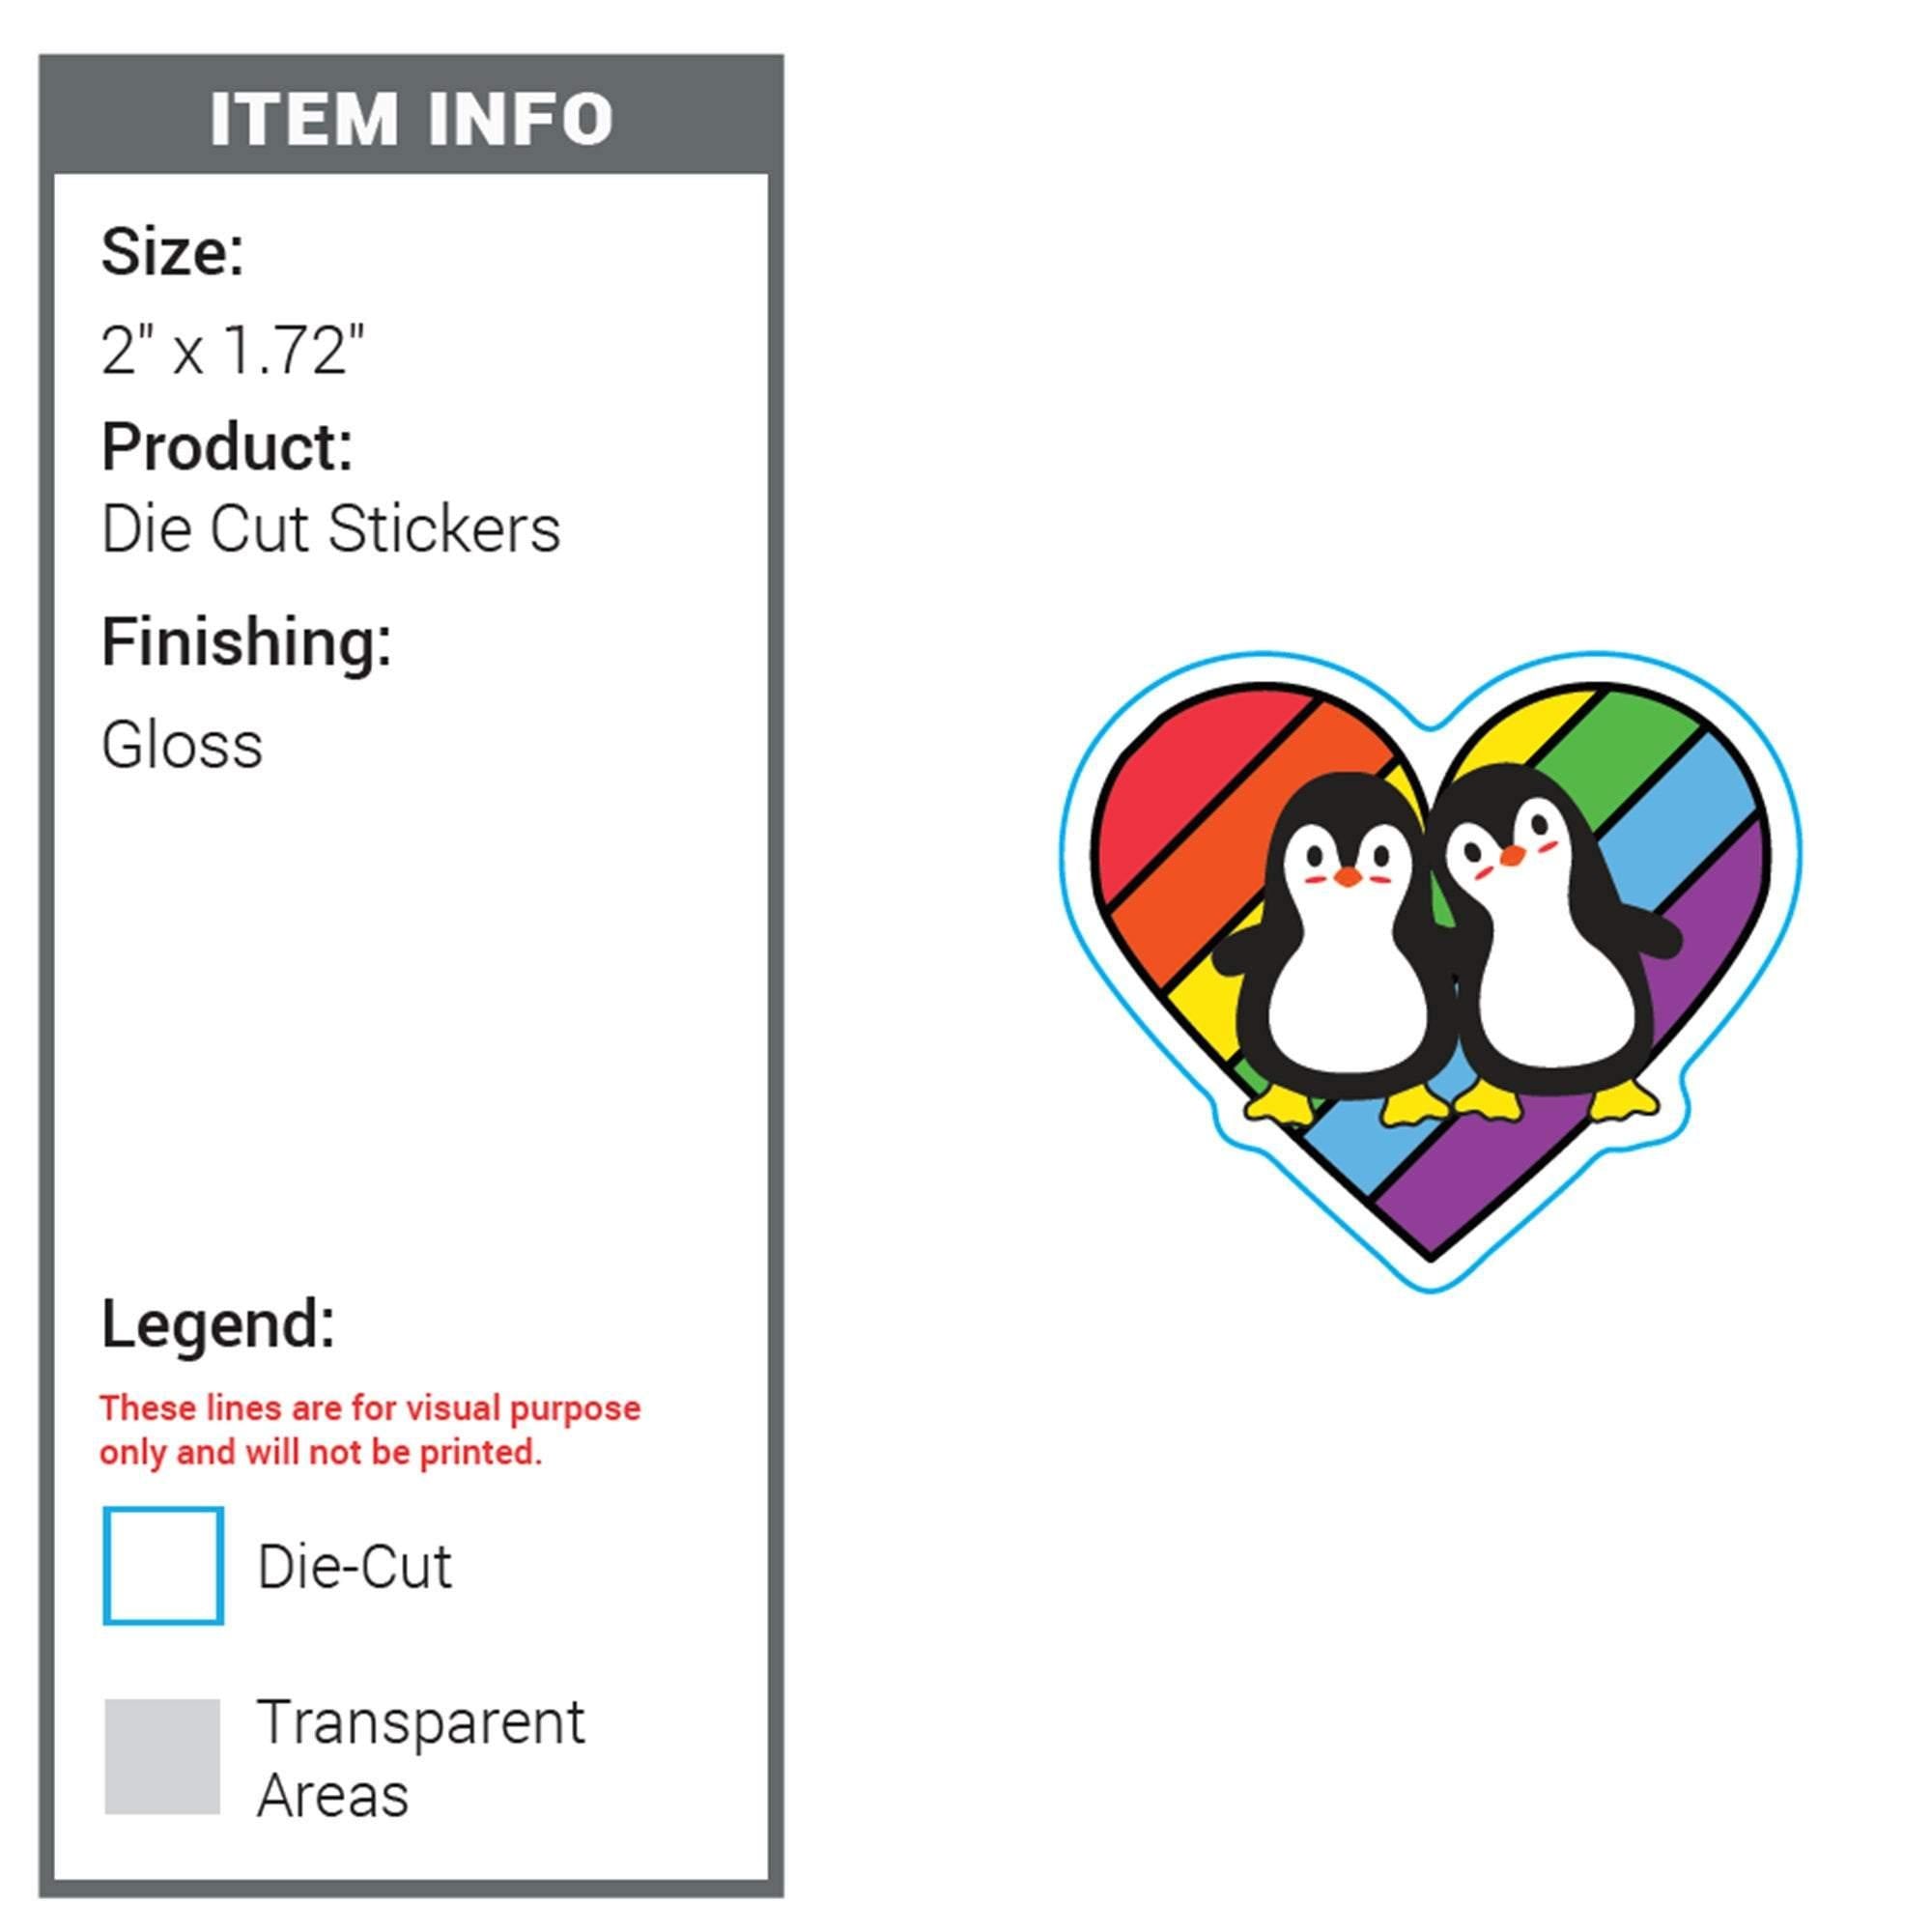 Penguins Pride Animal Collection Vinyl Sticker Rainbow LGBTQ Gift For Him/Her - Pin Ace